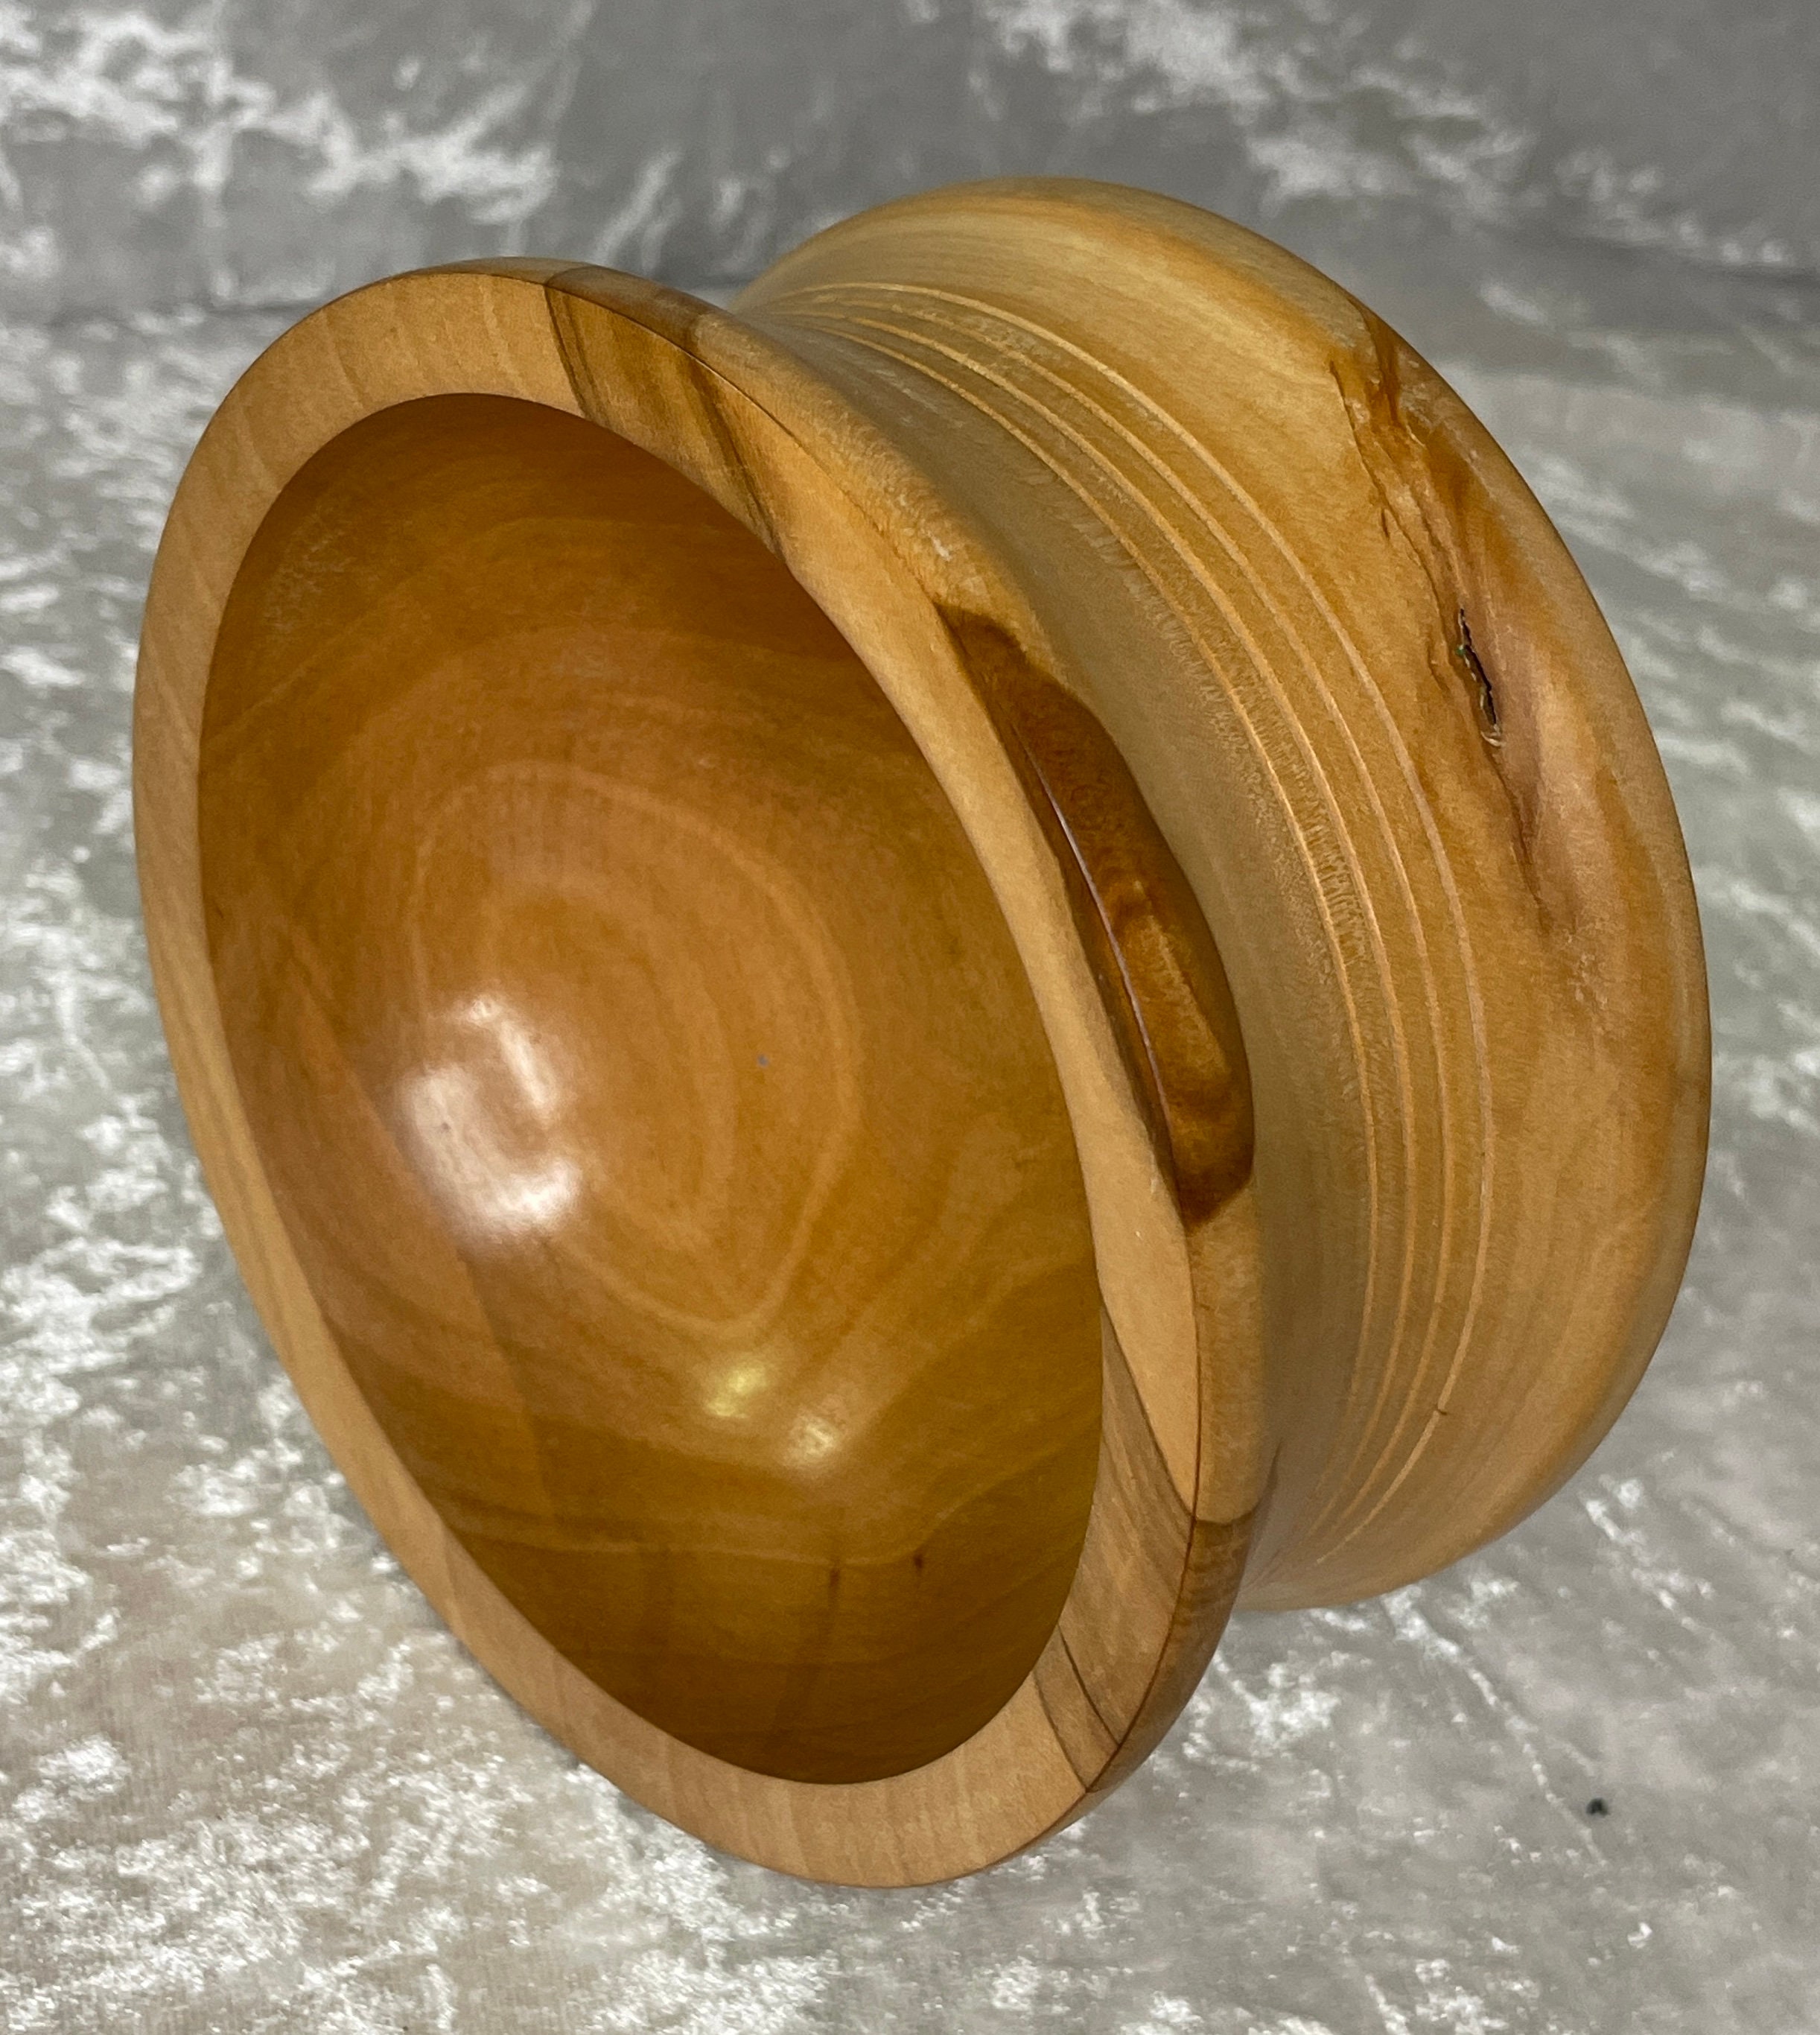 Hand-turned Bowl Made of Pear Wood, Wooden Bowl, Jewelry Bowl, Handmade,  Bowl, Decoration, Unique, Gift Idea, Present 